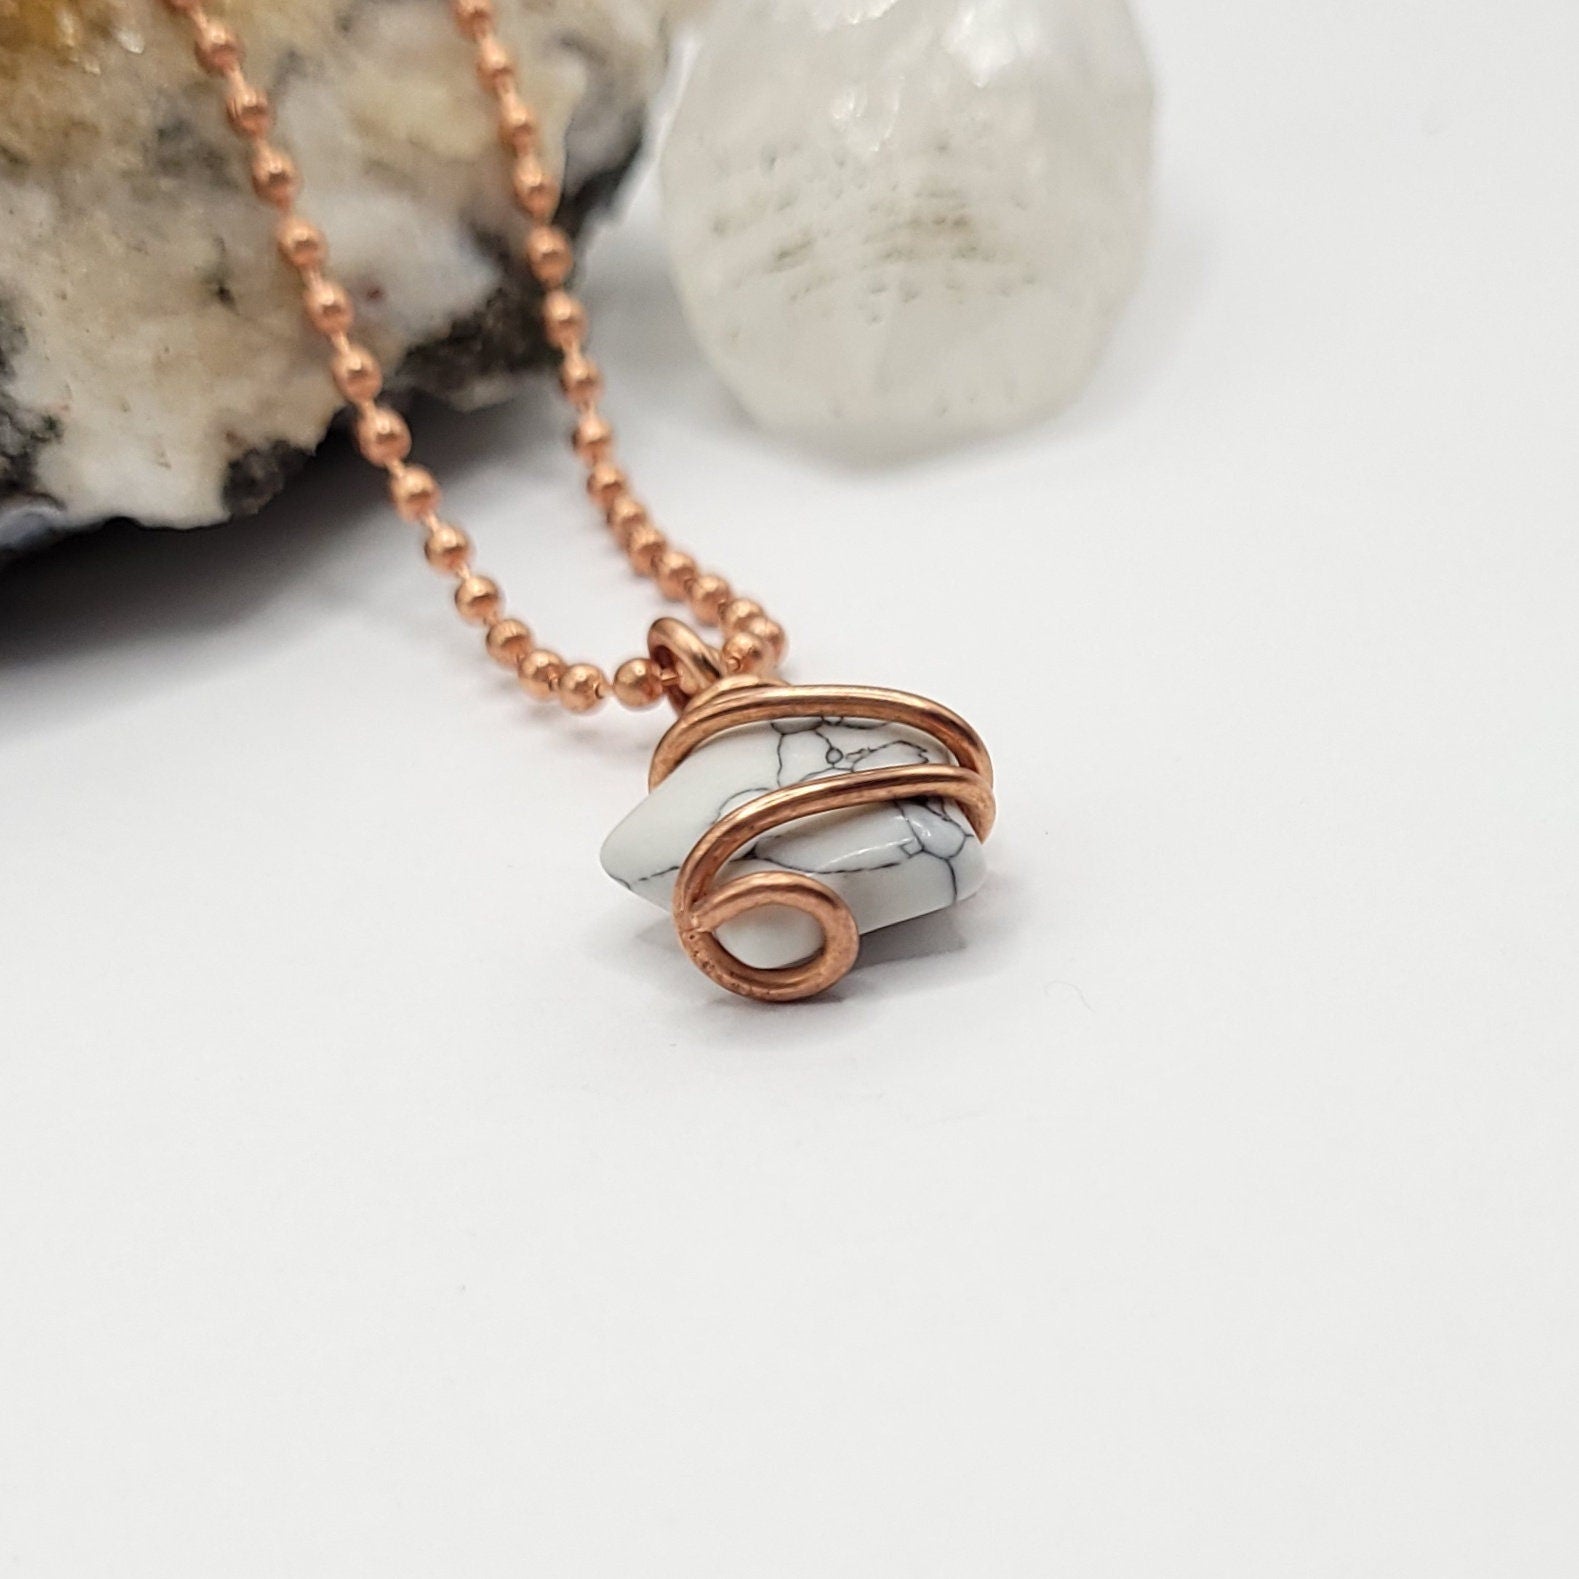 Howlite Star Necklace, Copper Wire Wrapped Howlite Star Pendant, Howlite Crystal